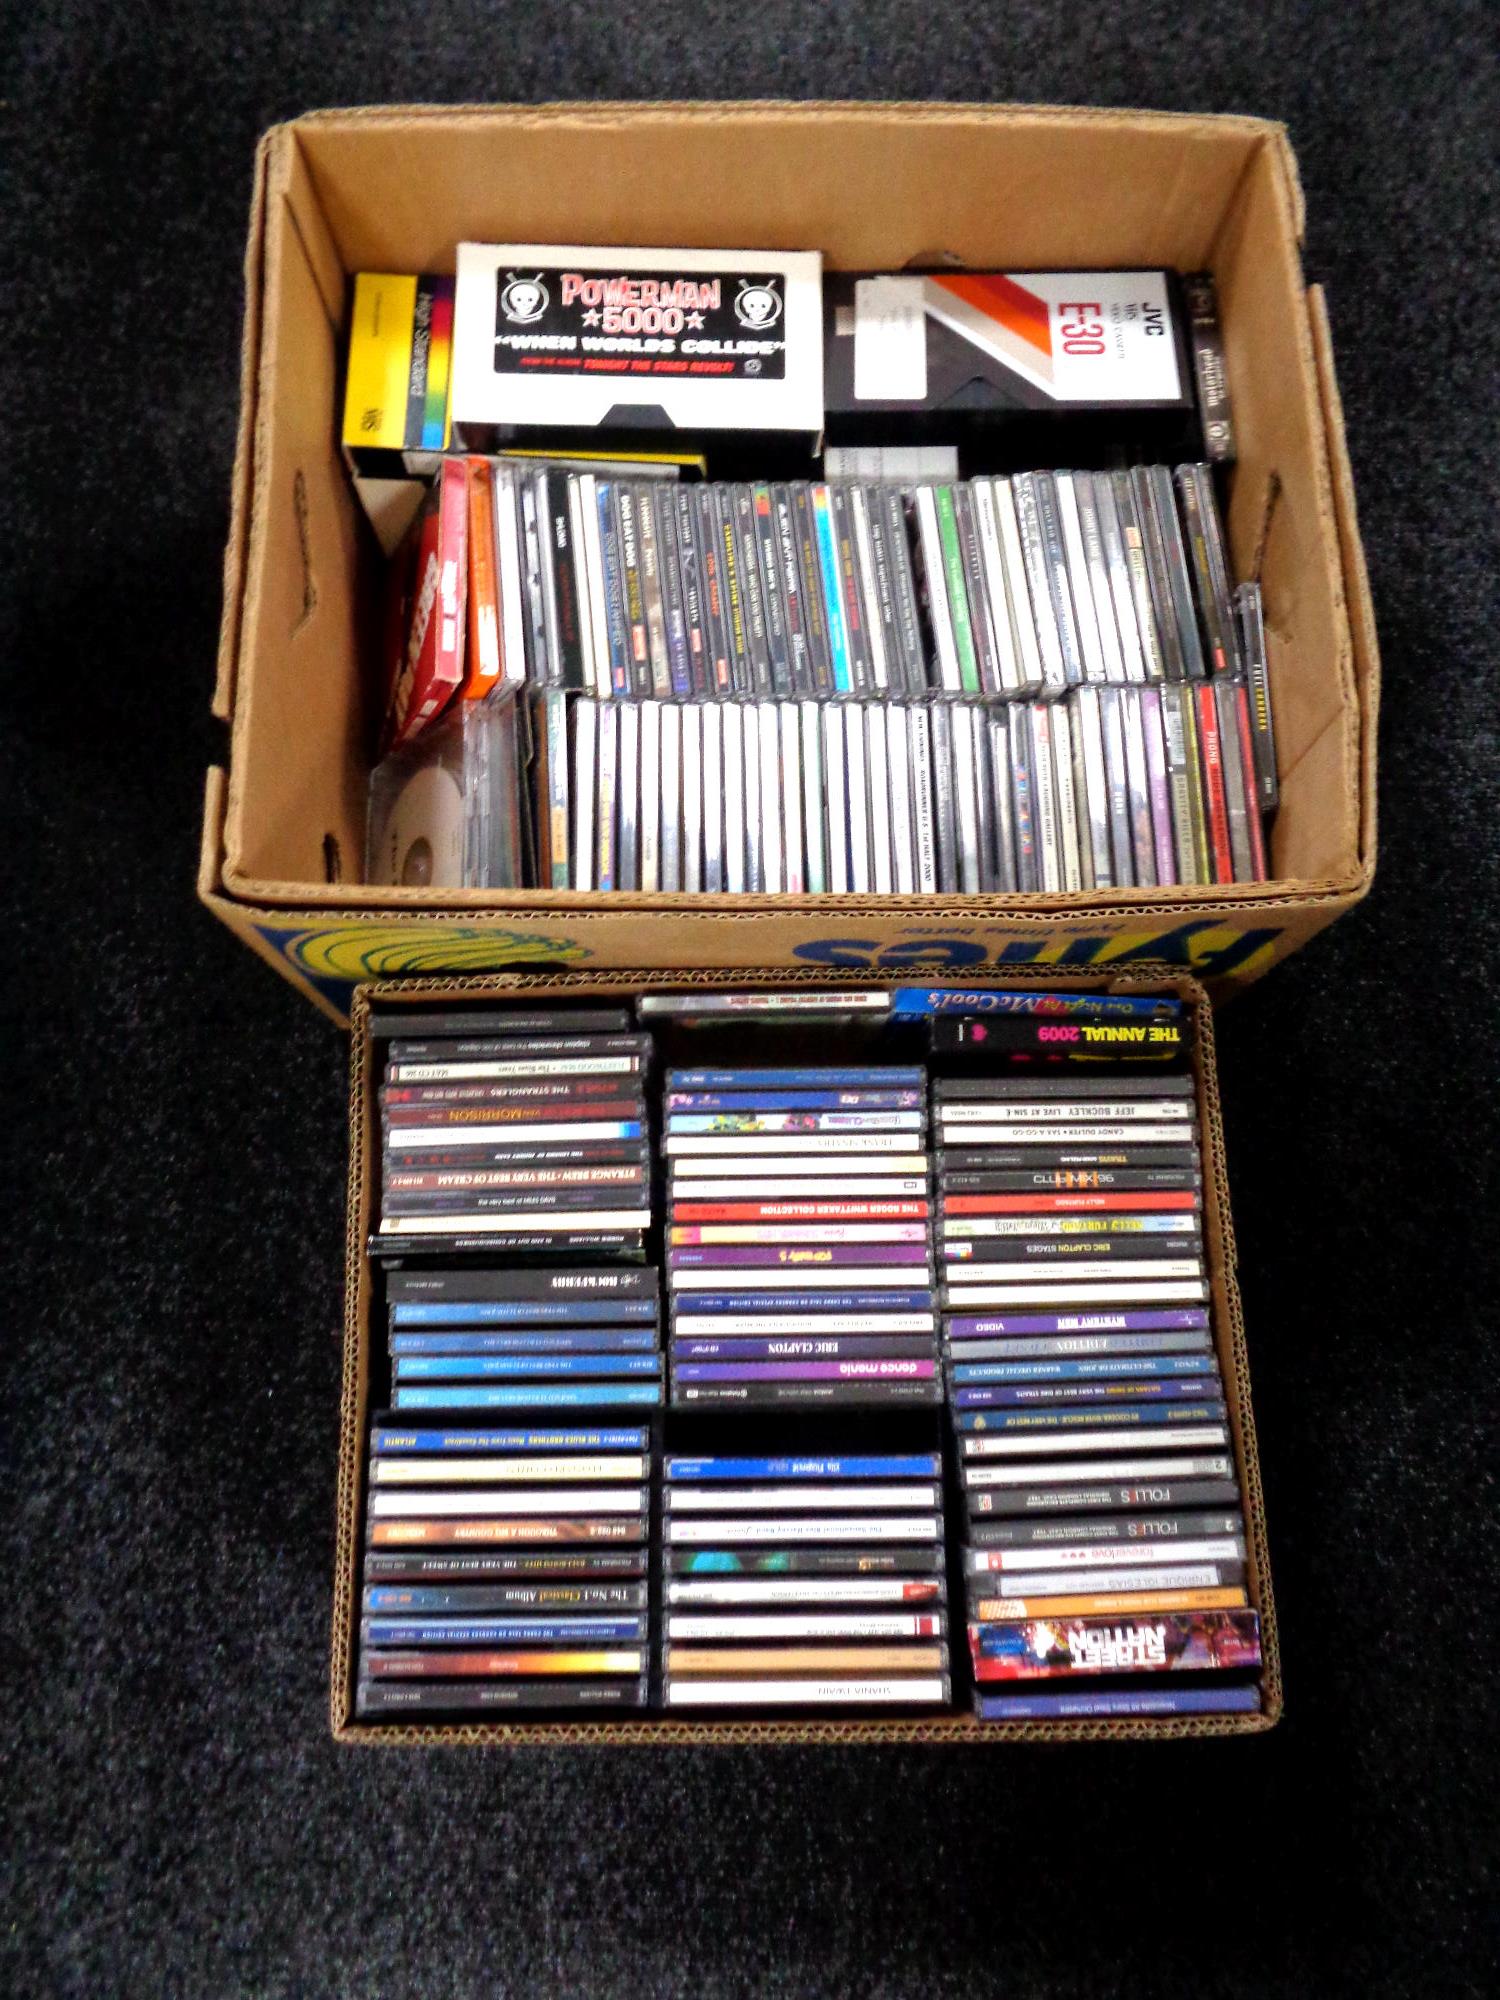 Two boxes of CDs - Jeff Buckley, Frank Sinatra,